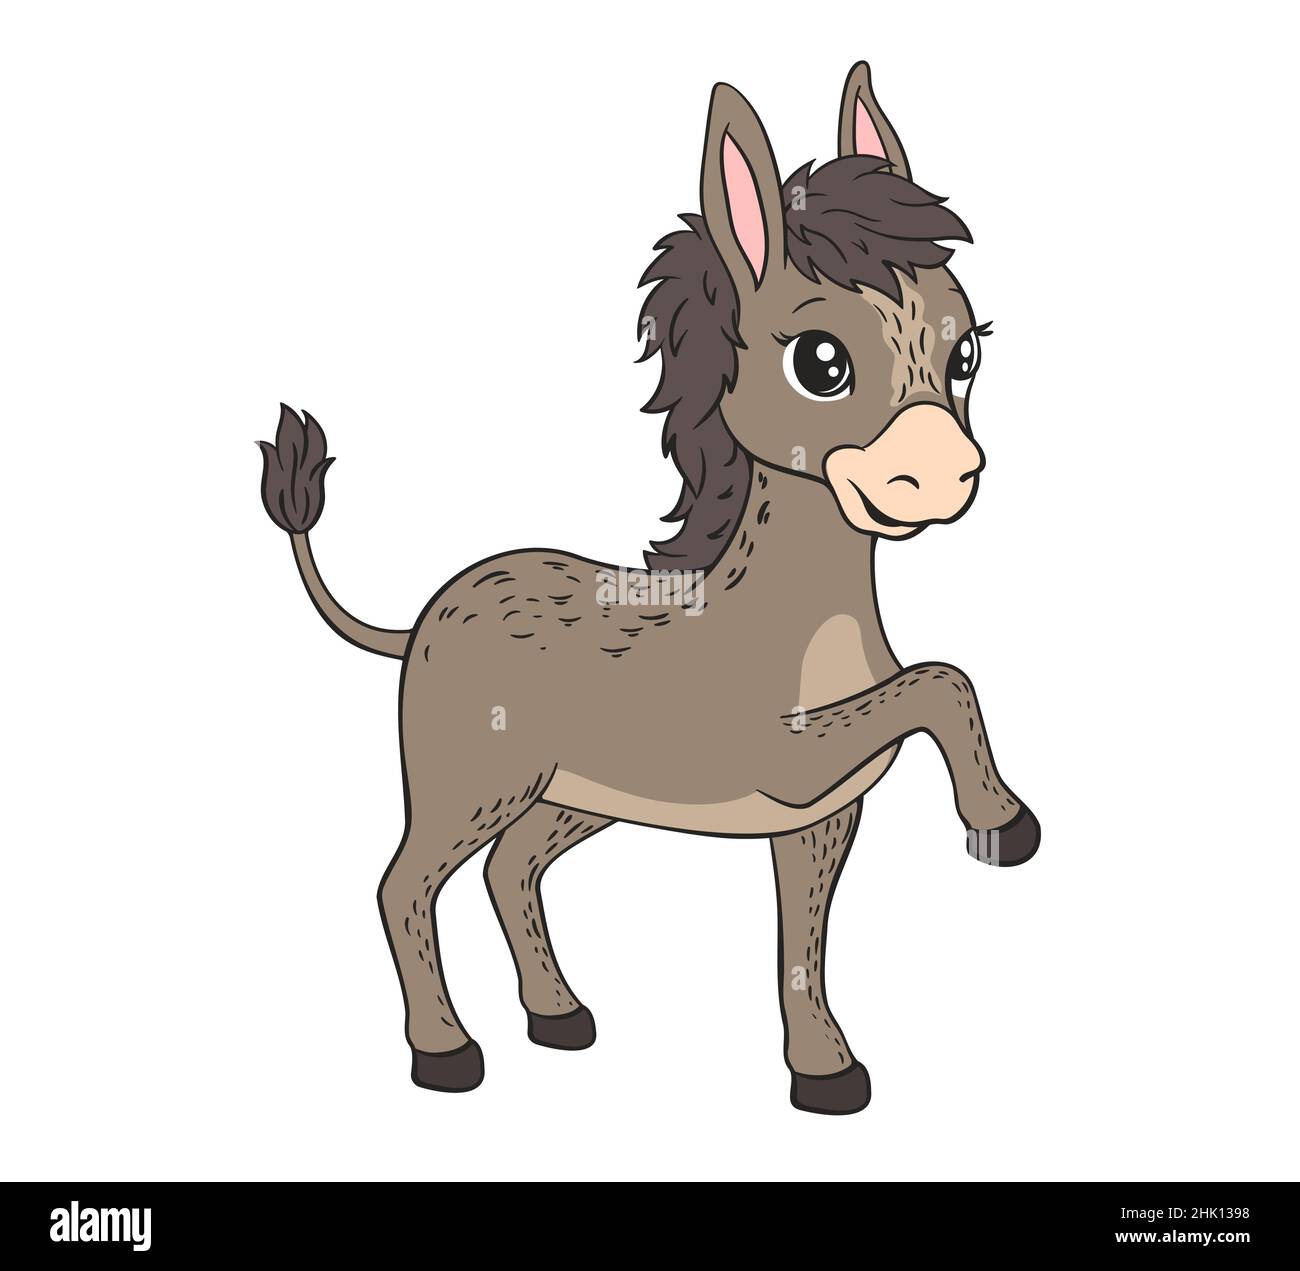 Little gray donkey with big ears and tail.Vector illustration in cartoon style black and white line art Stock Vector